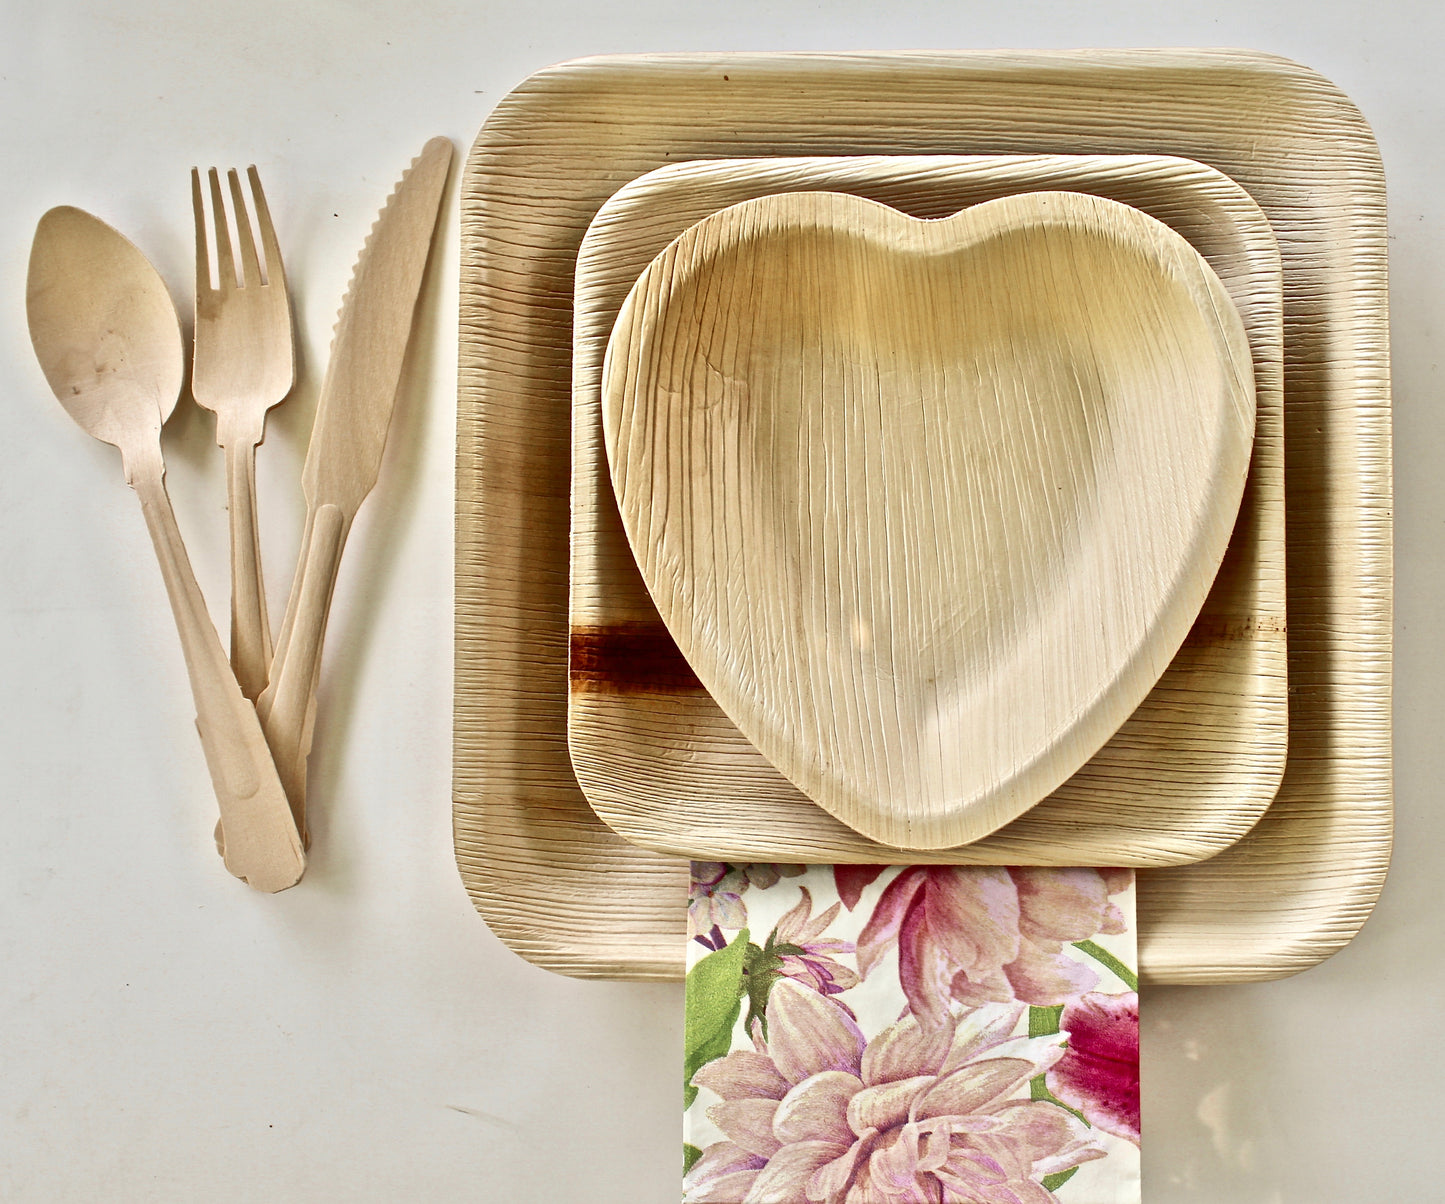 Palm Leaf plates 25 Pice 9.5" Square 25 Pice 7" Square - 25 pic 6" Heart and 75 Pic cutlery